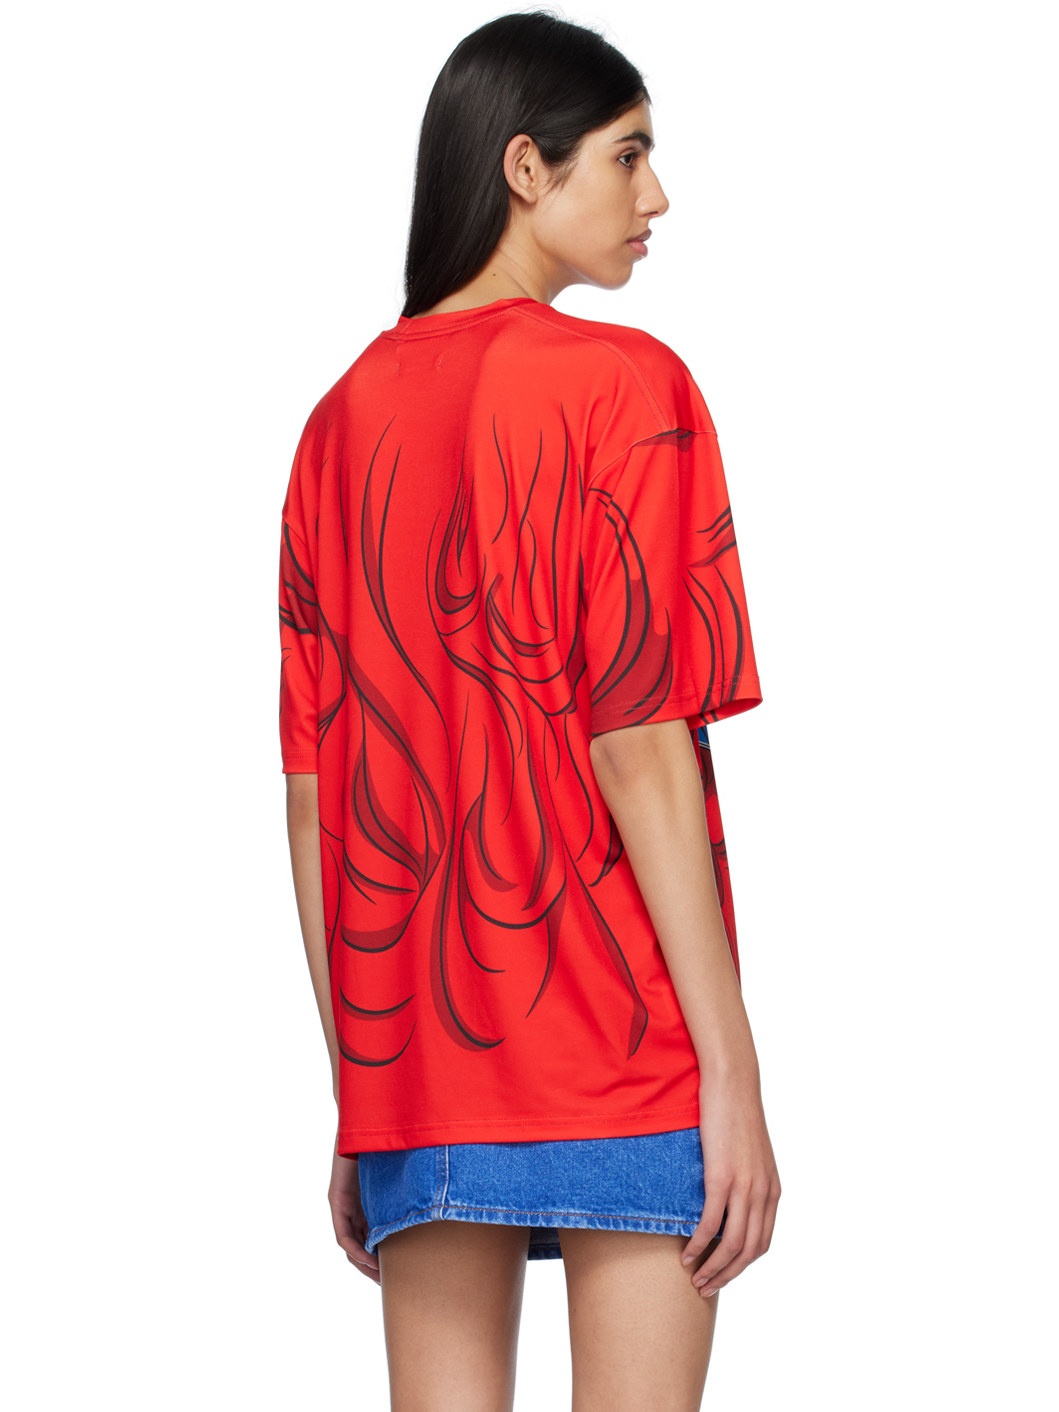 SSENSE Exclusive Red Goggle Girl T-Shirt - 3